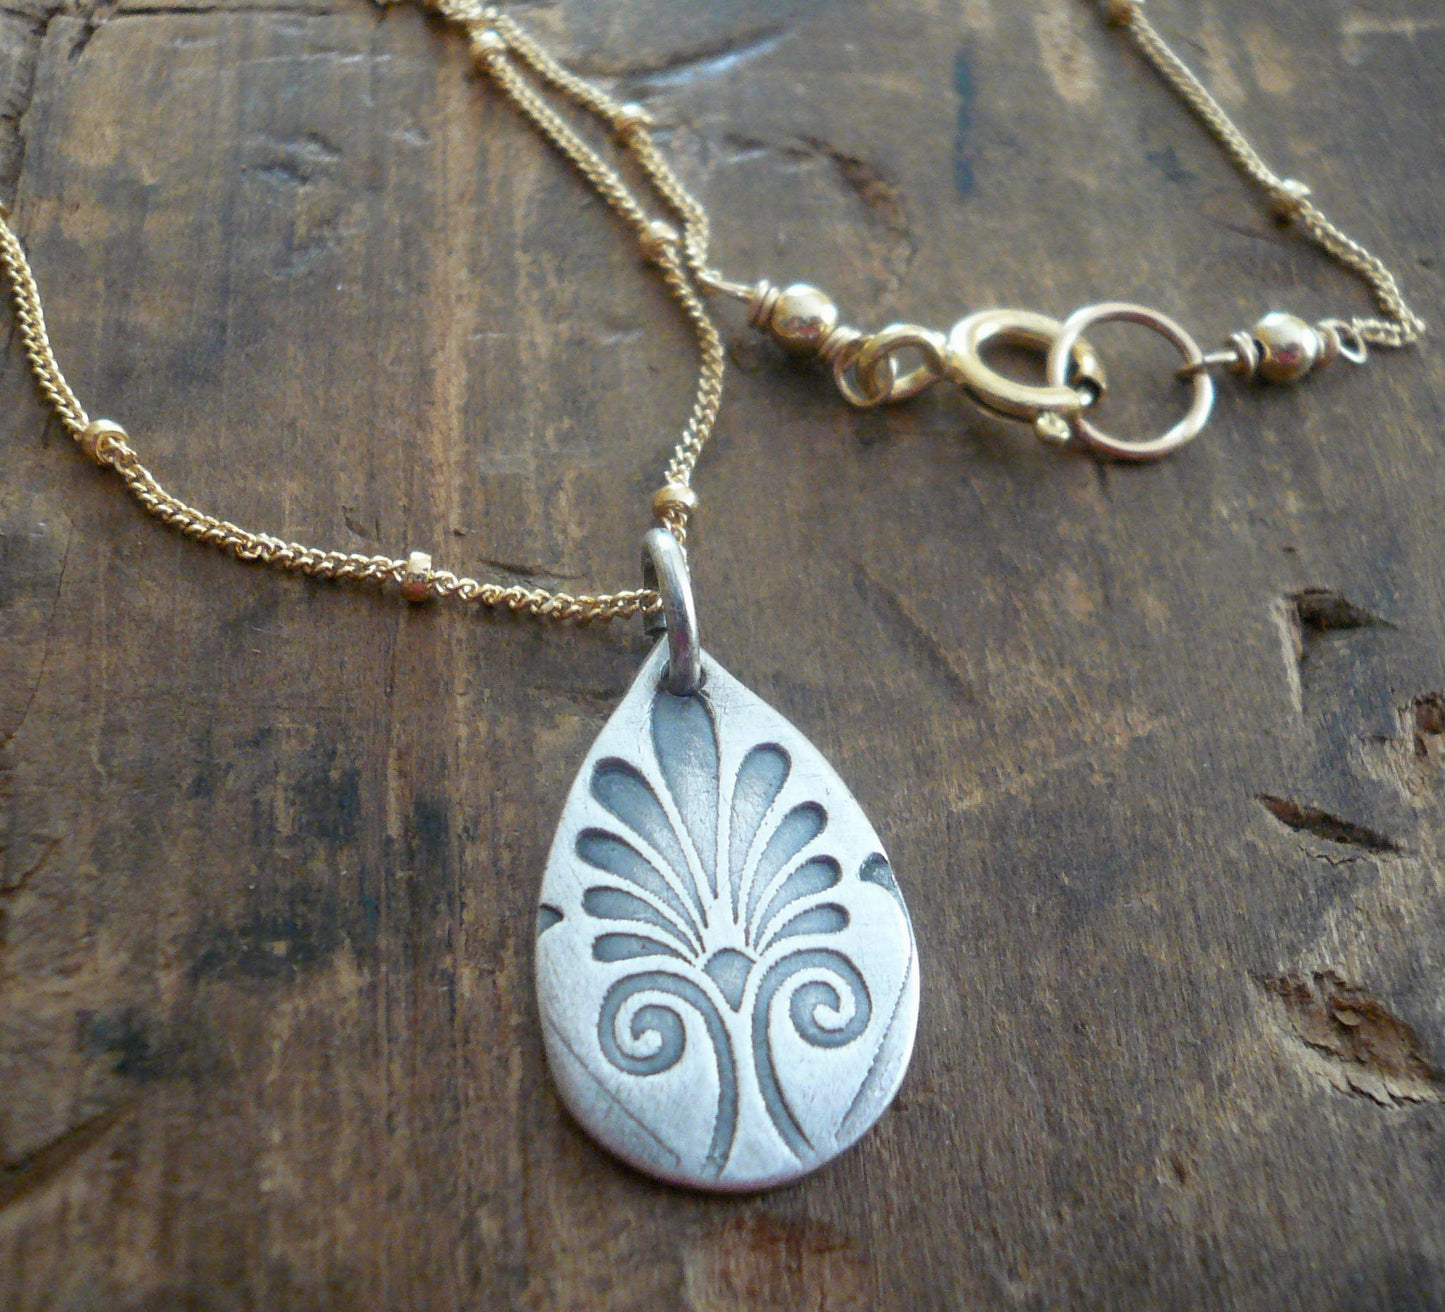 French Quarter Necklace -Tear- Oxidized fine silver and 14kt Goldfill or sterling silver chain. Handmade